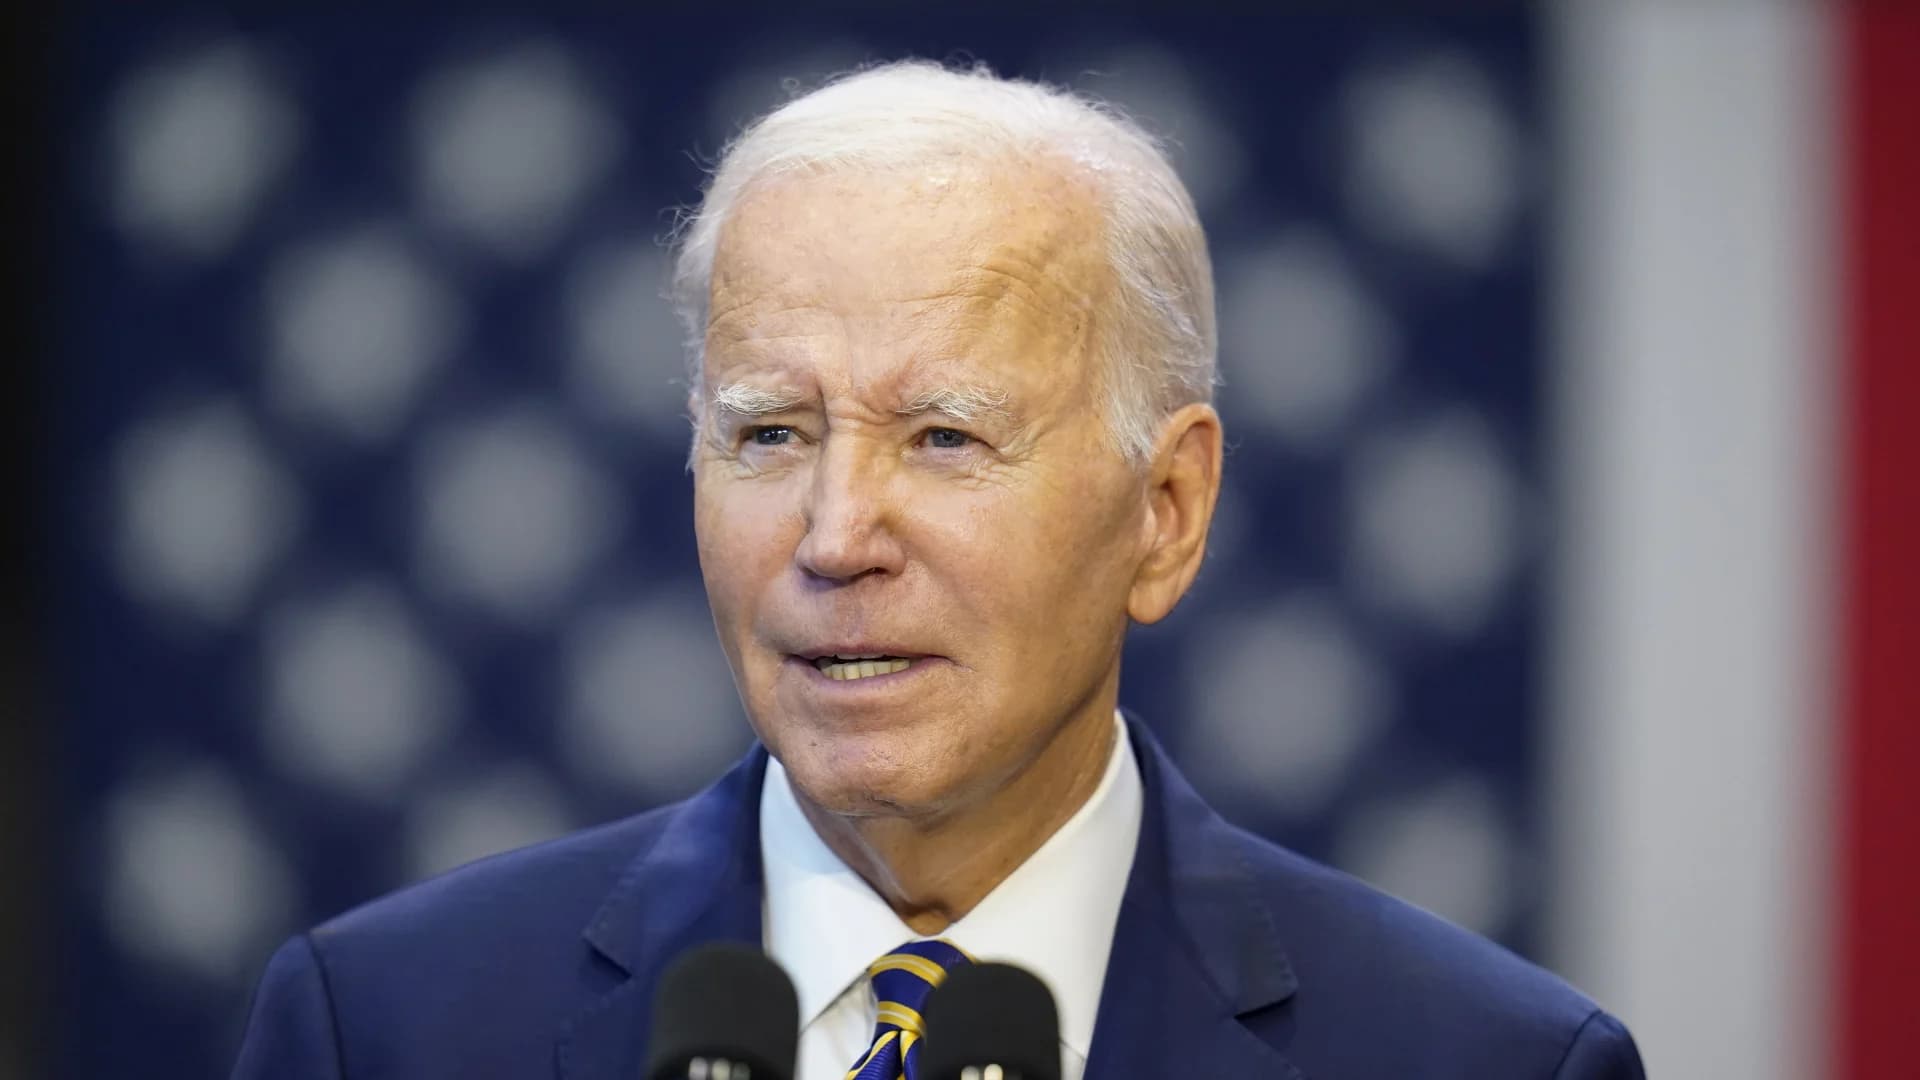 Biden won't call for redactions in special counsel report on classified documents handling